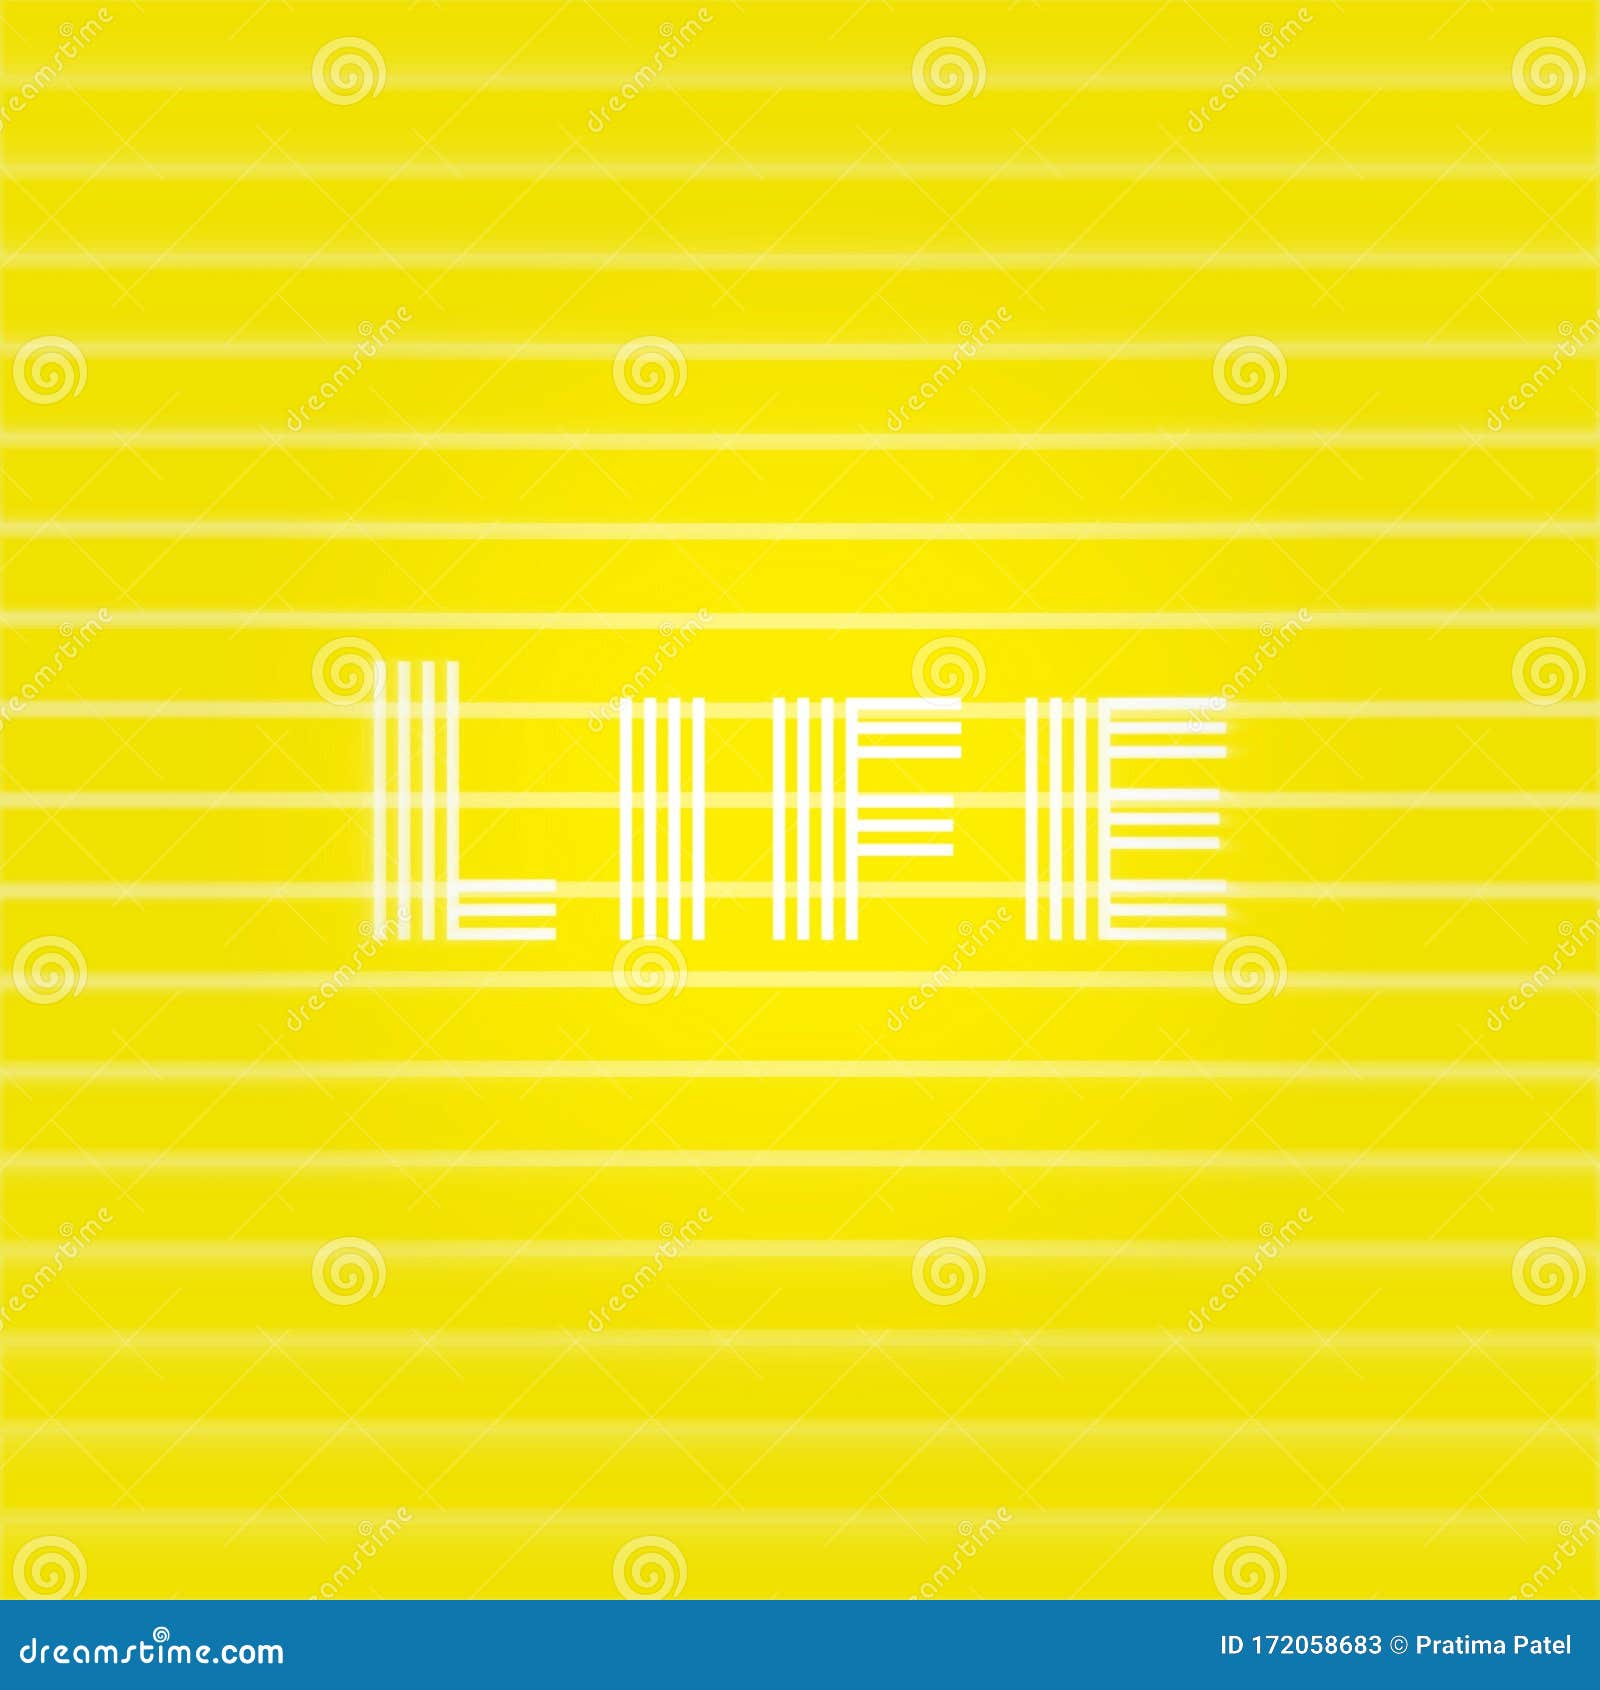 Beautiful Yellow Abstract Background with Colourful Lines and Text, Life  Quotes Wallpaper, Graphic Design Illustration Stock Illustration -  Illustration of motivational, abstract: 172058683